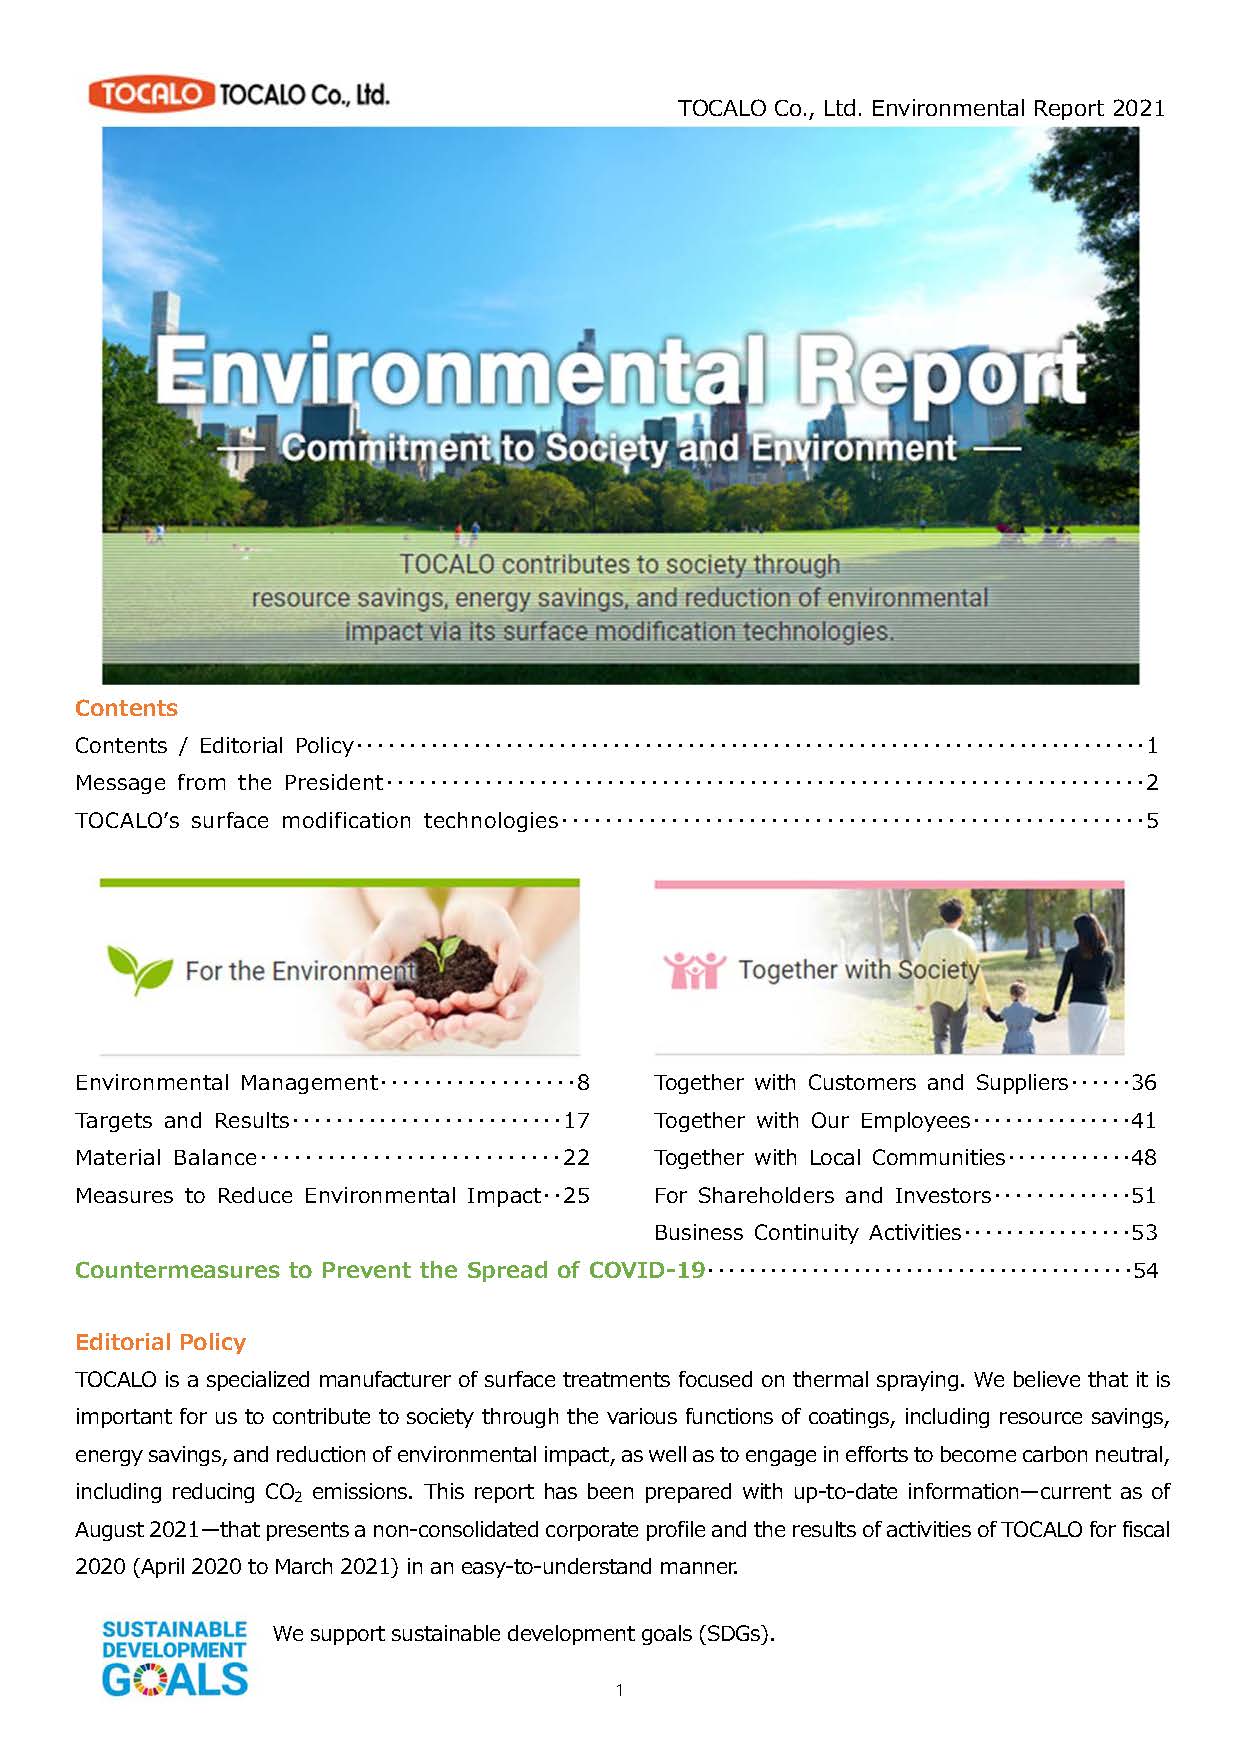 The environmental reports 2021